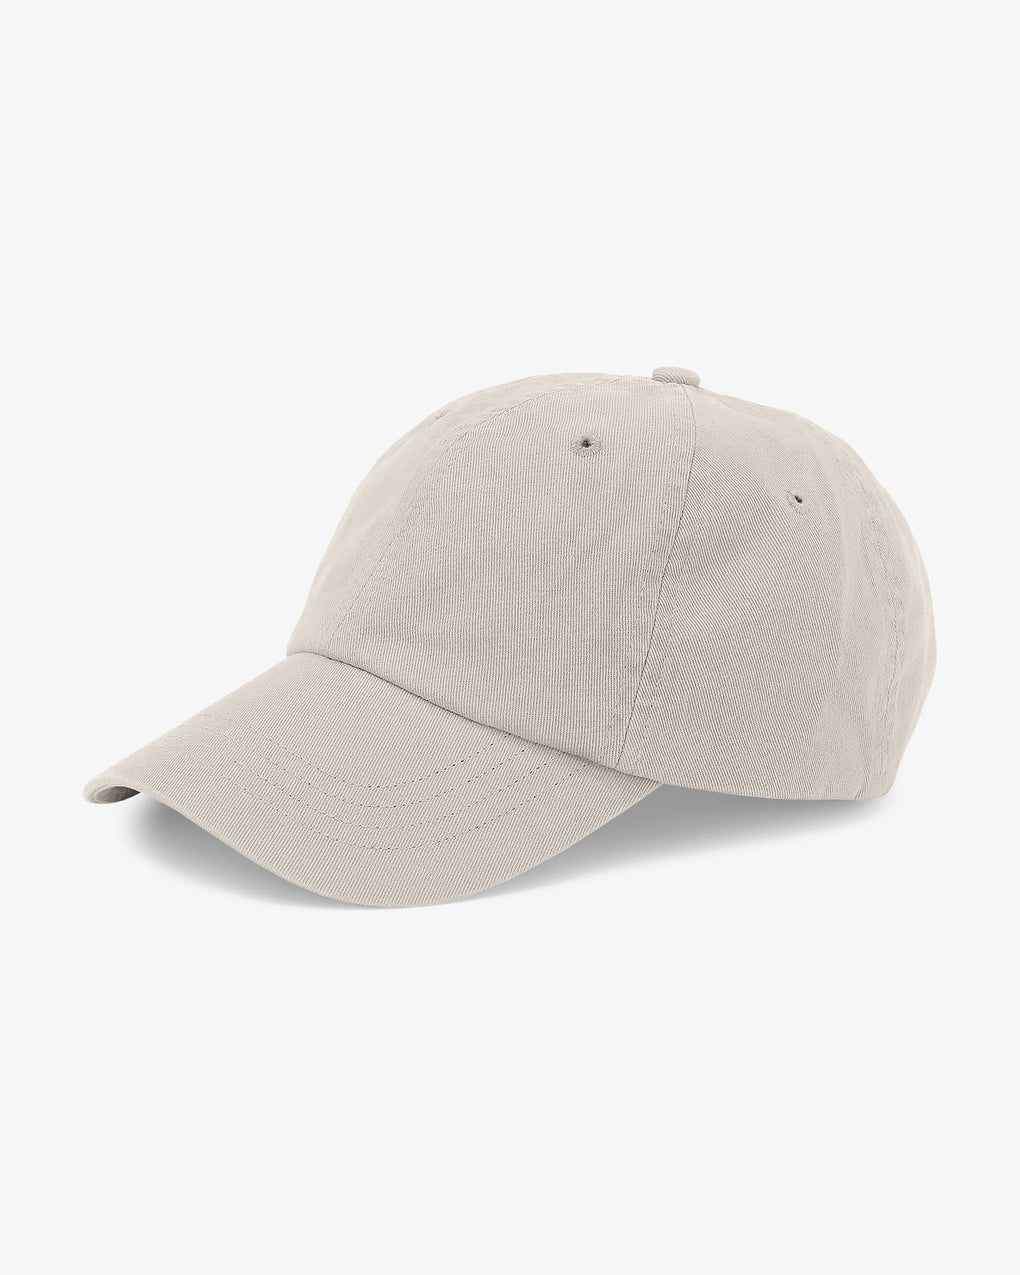 Colorful Standard Organic Cotton Cap in beige color isolated on a white background.